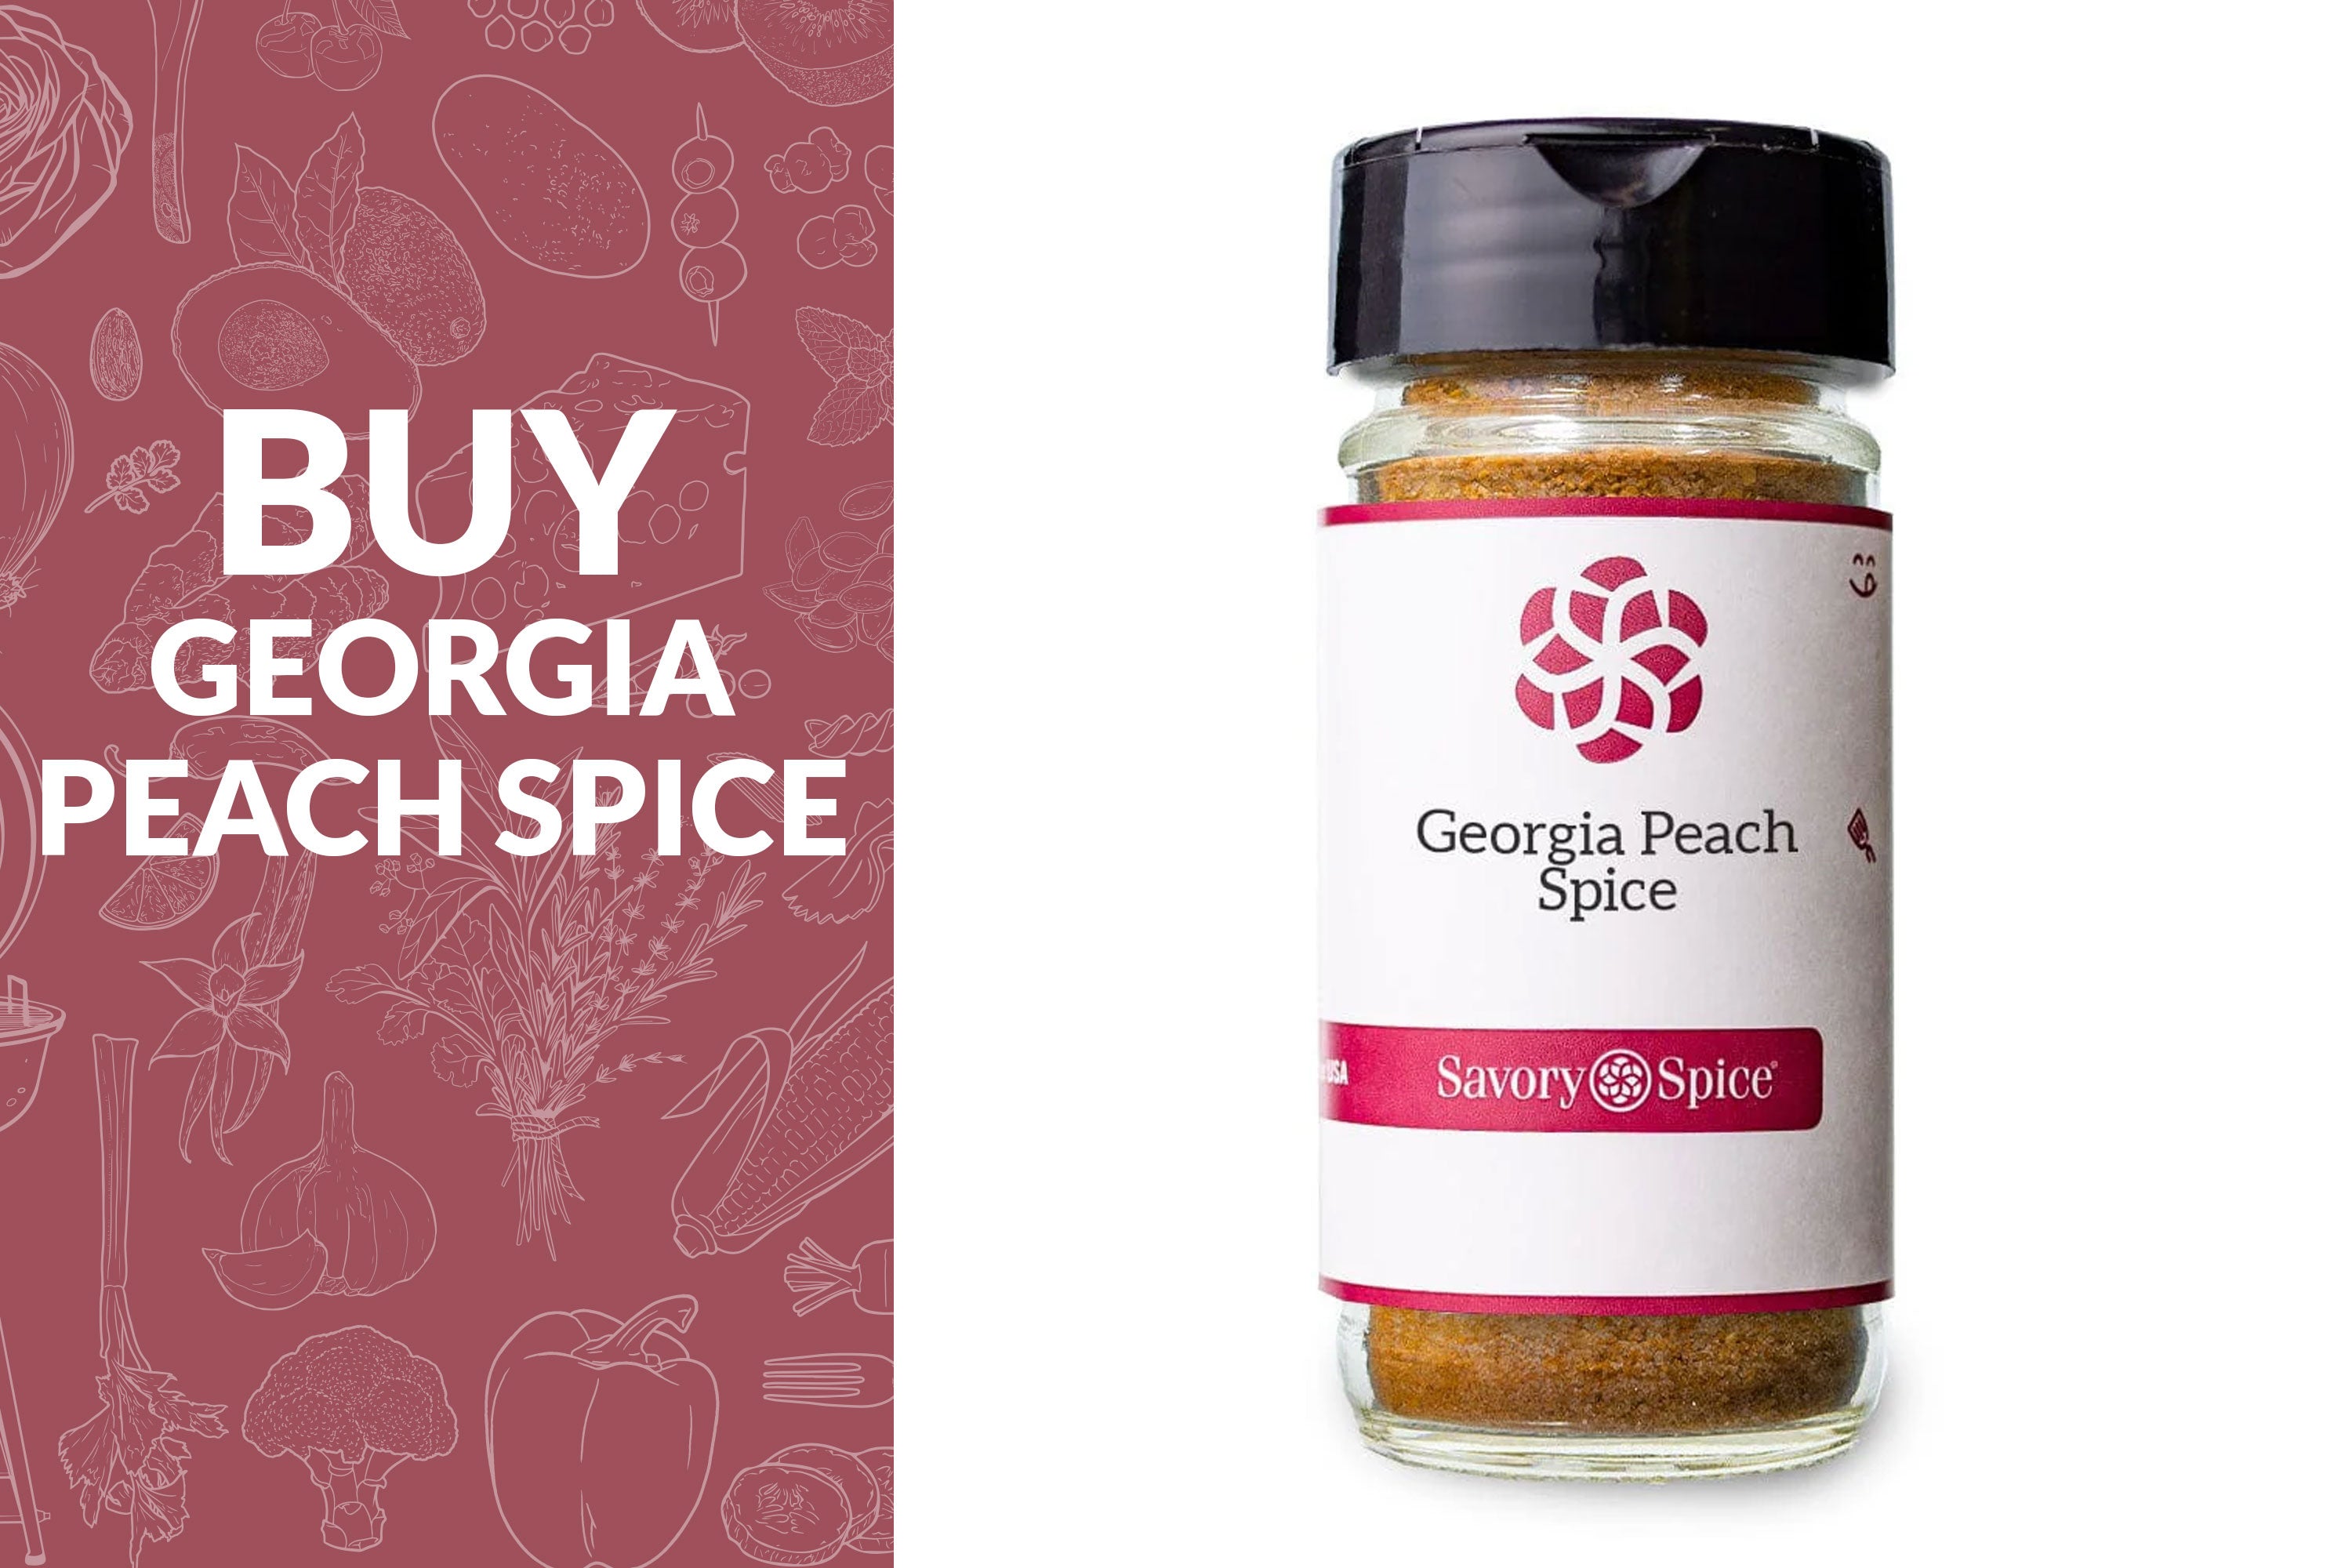 Buy Georgia Peach Spice on the left with jar on the right